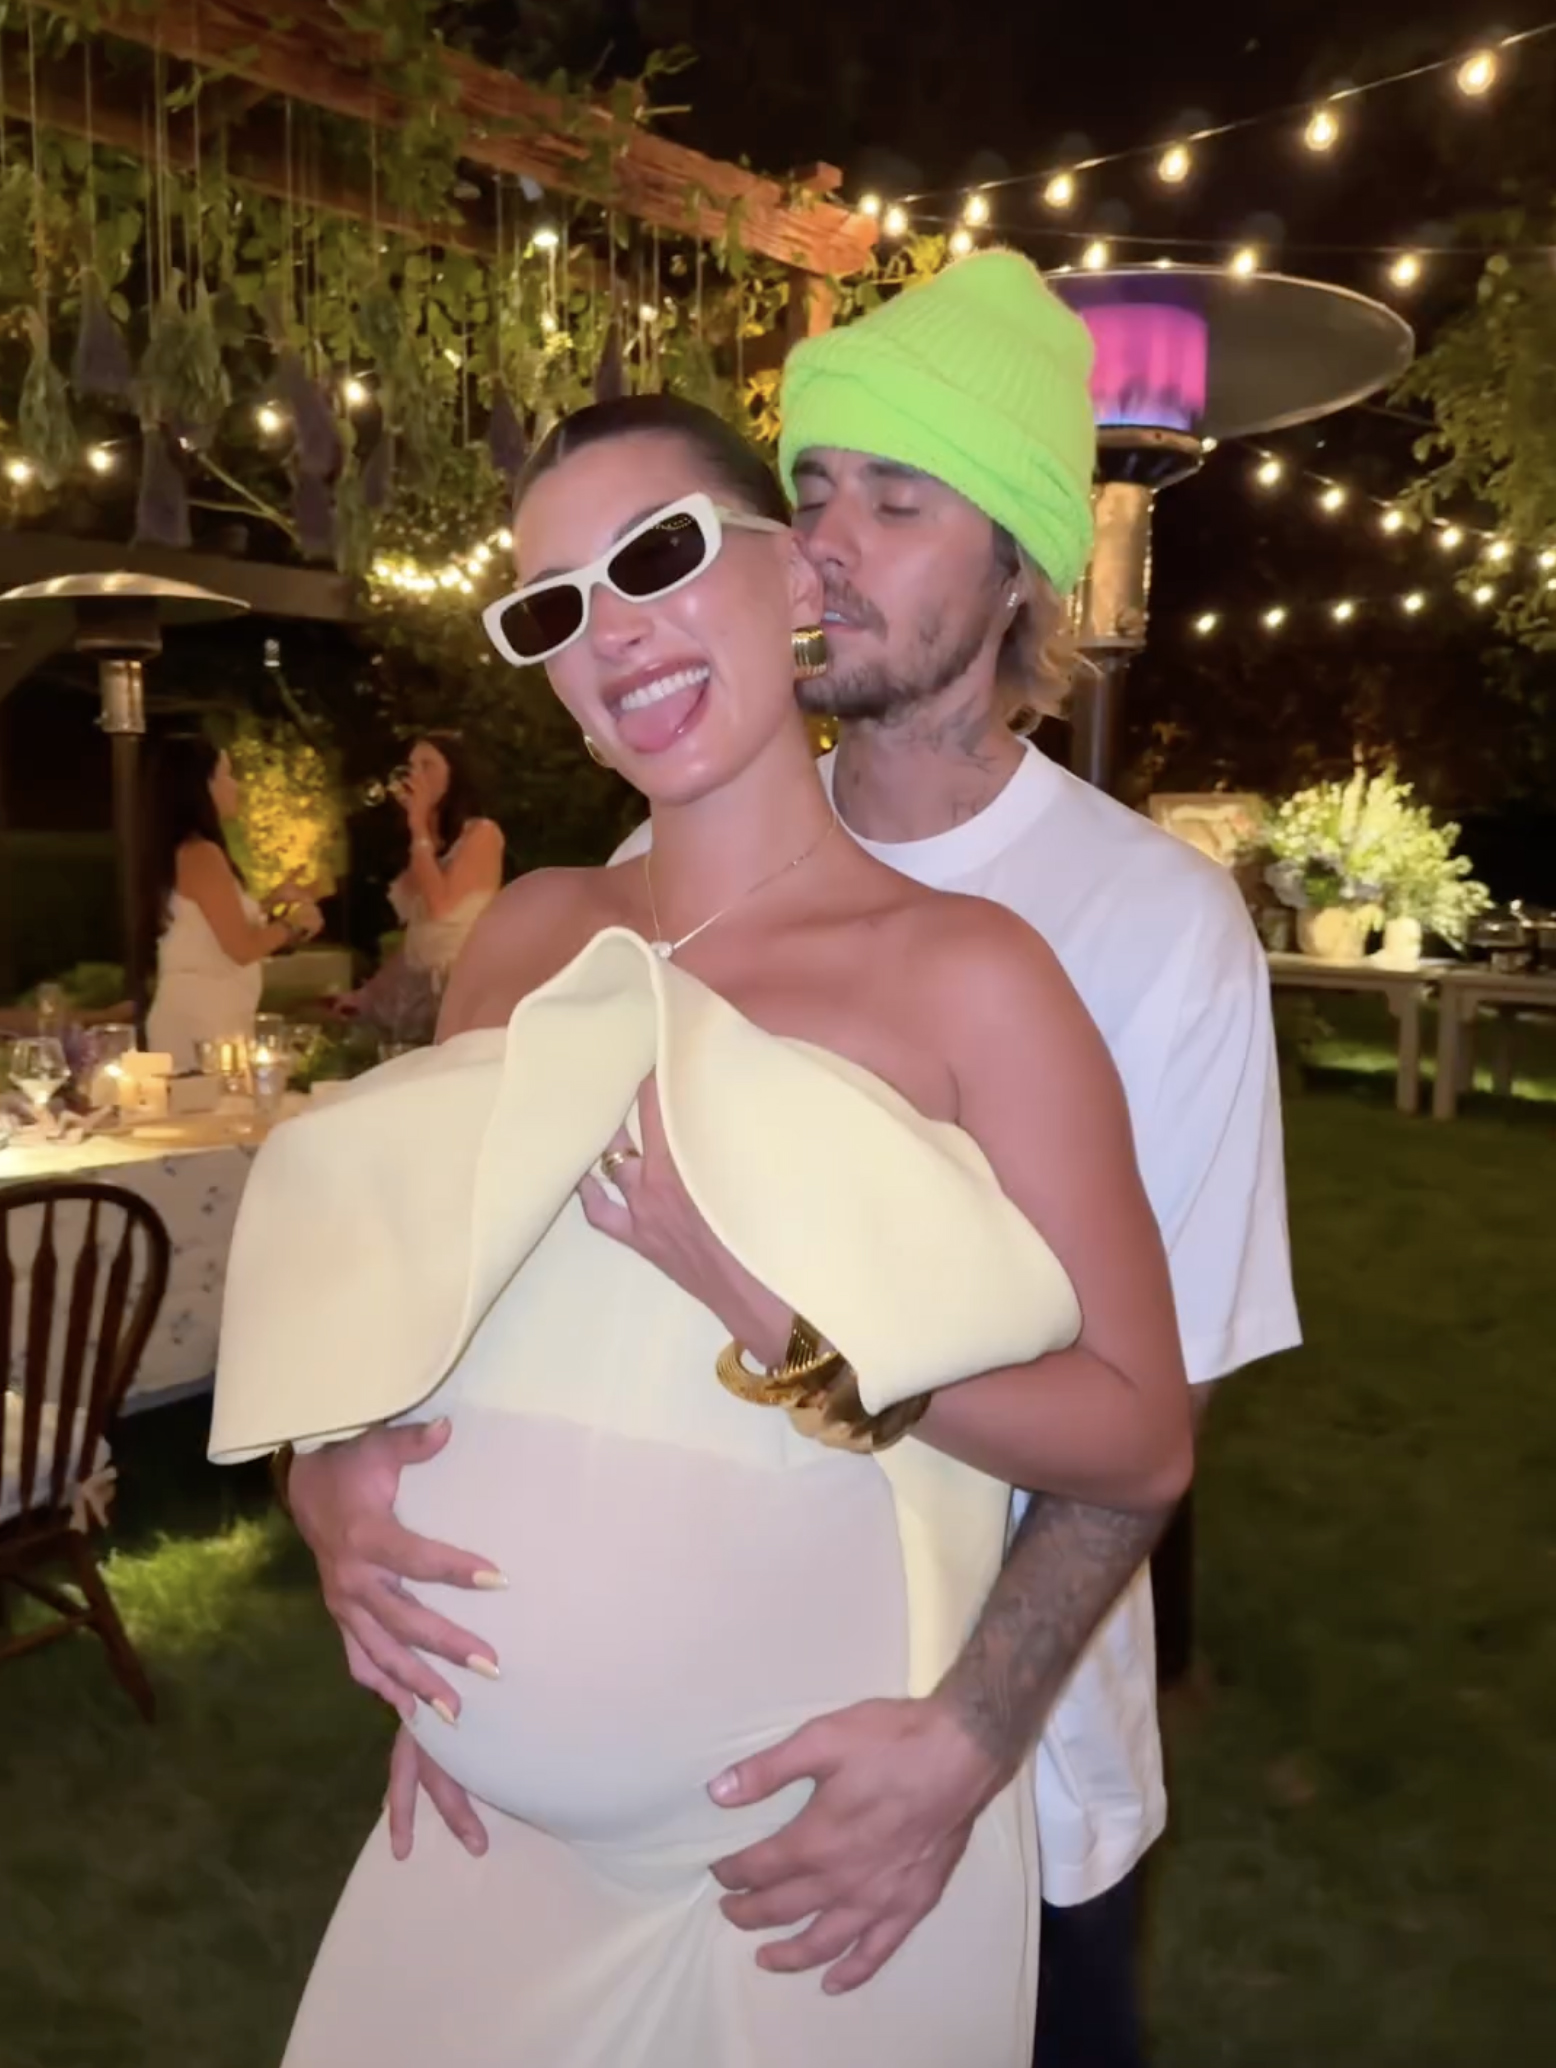 The fans noticed clues in photos from Hailey Bieber's baby shower